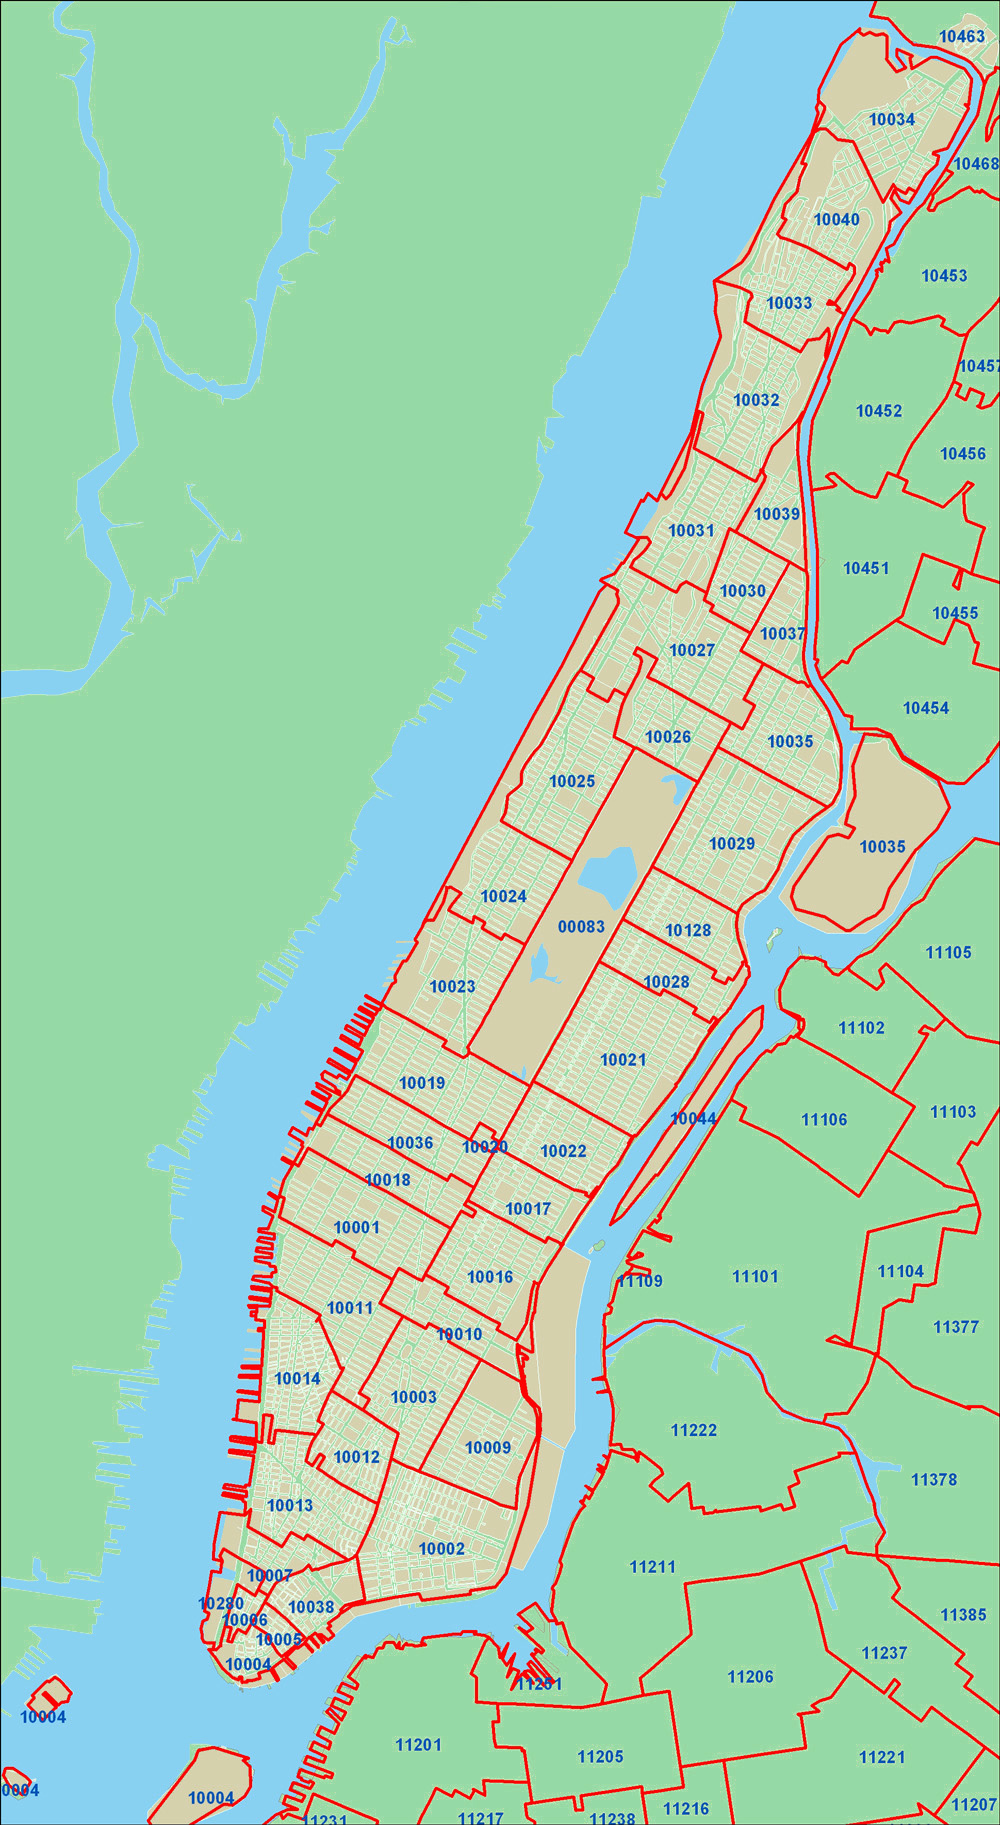 Detailed Zip Codes Map Of New York City New York City Detailed Zip Codes Map 6580